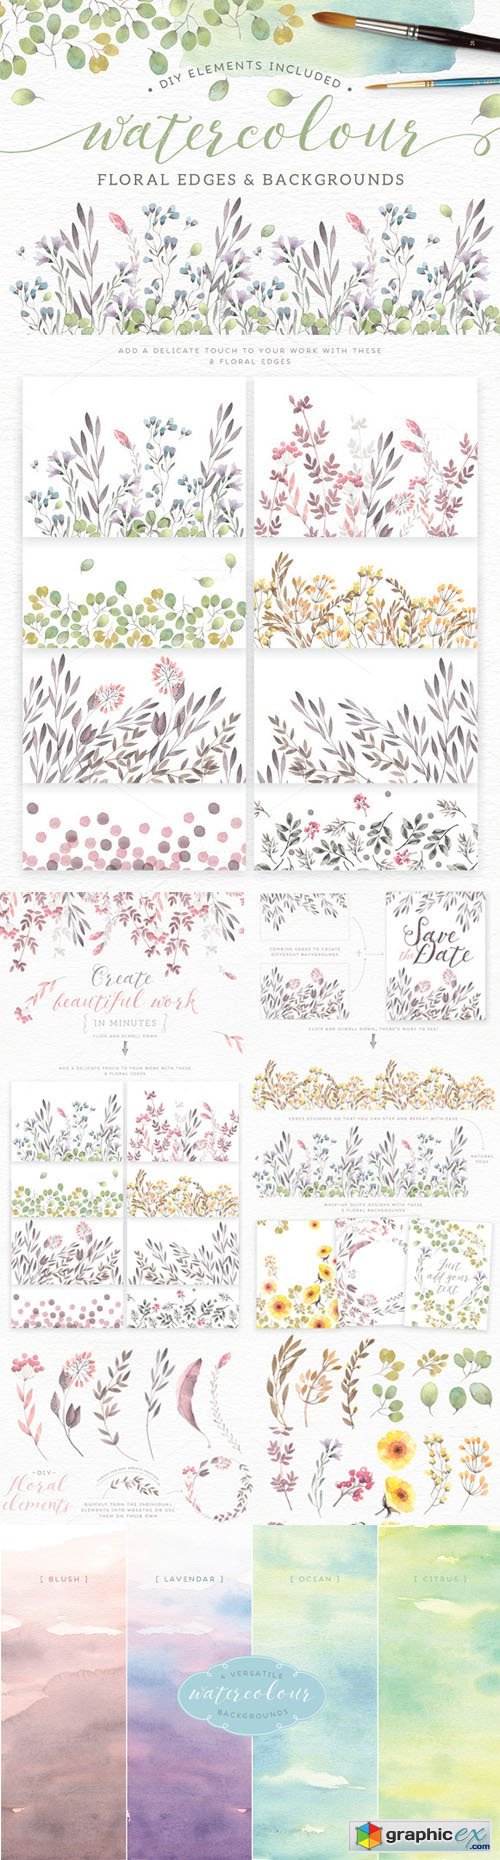 Watercolor floral edges+backgrounds » Free Download Vector Stock Image ...